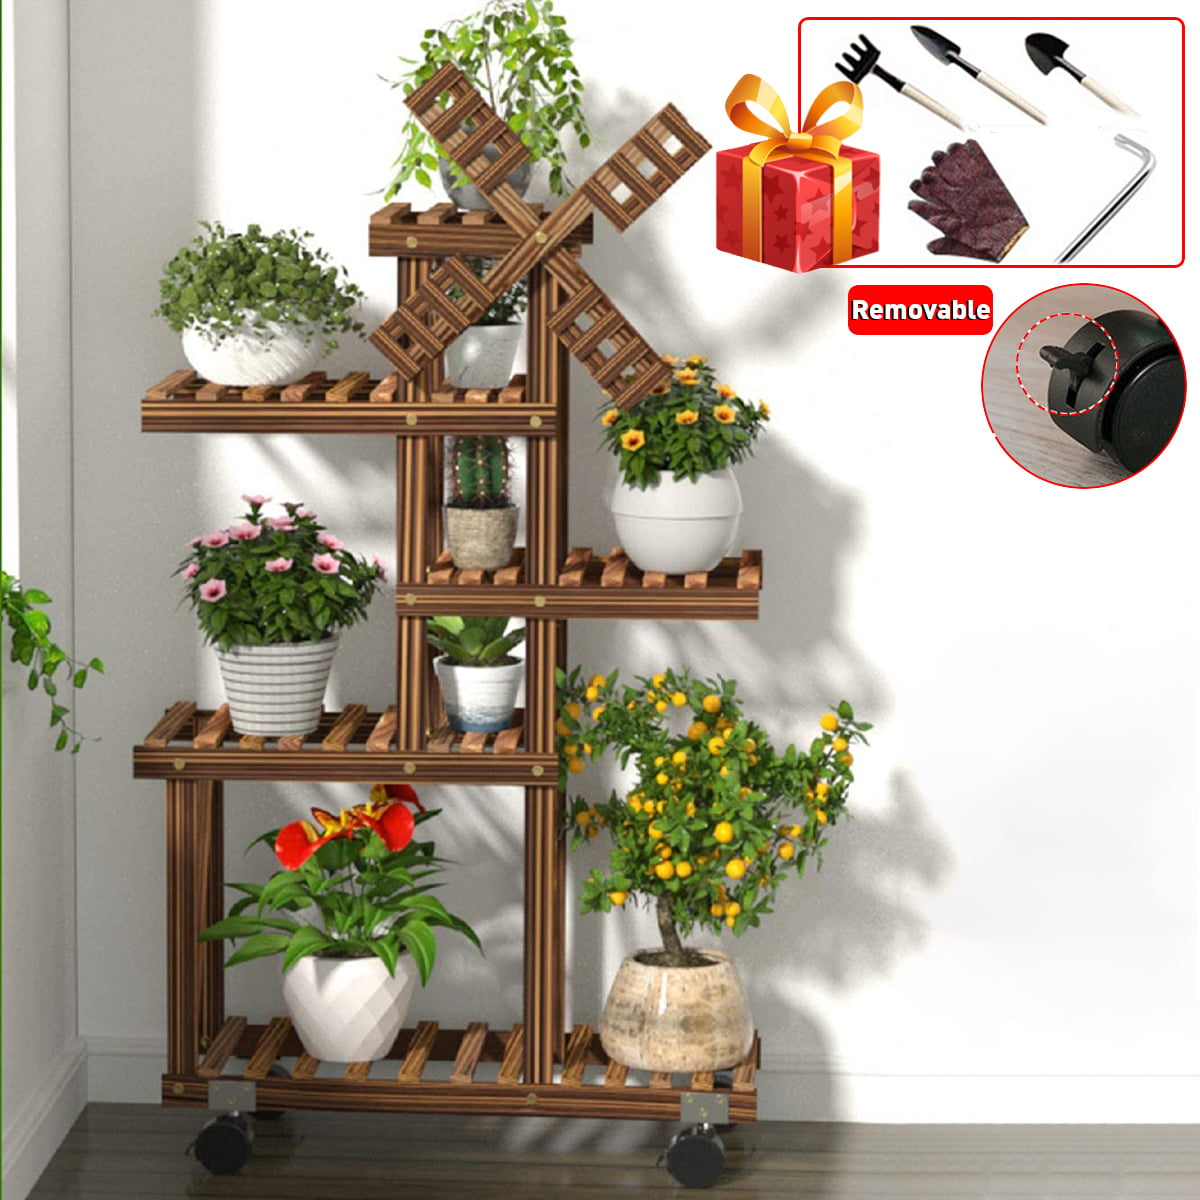 2 Tier Tall Bamboo Flower Plants Rack Heavy Duty Potted Holder Display Corner Stand 4-Tier Indoor Wood Plant Stand Shelf 2 Level for Living Room Pot Plants